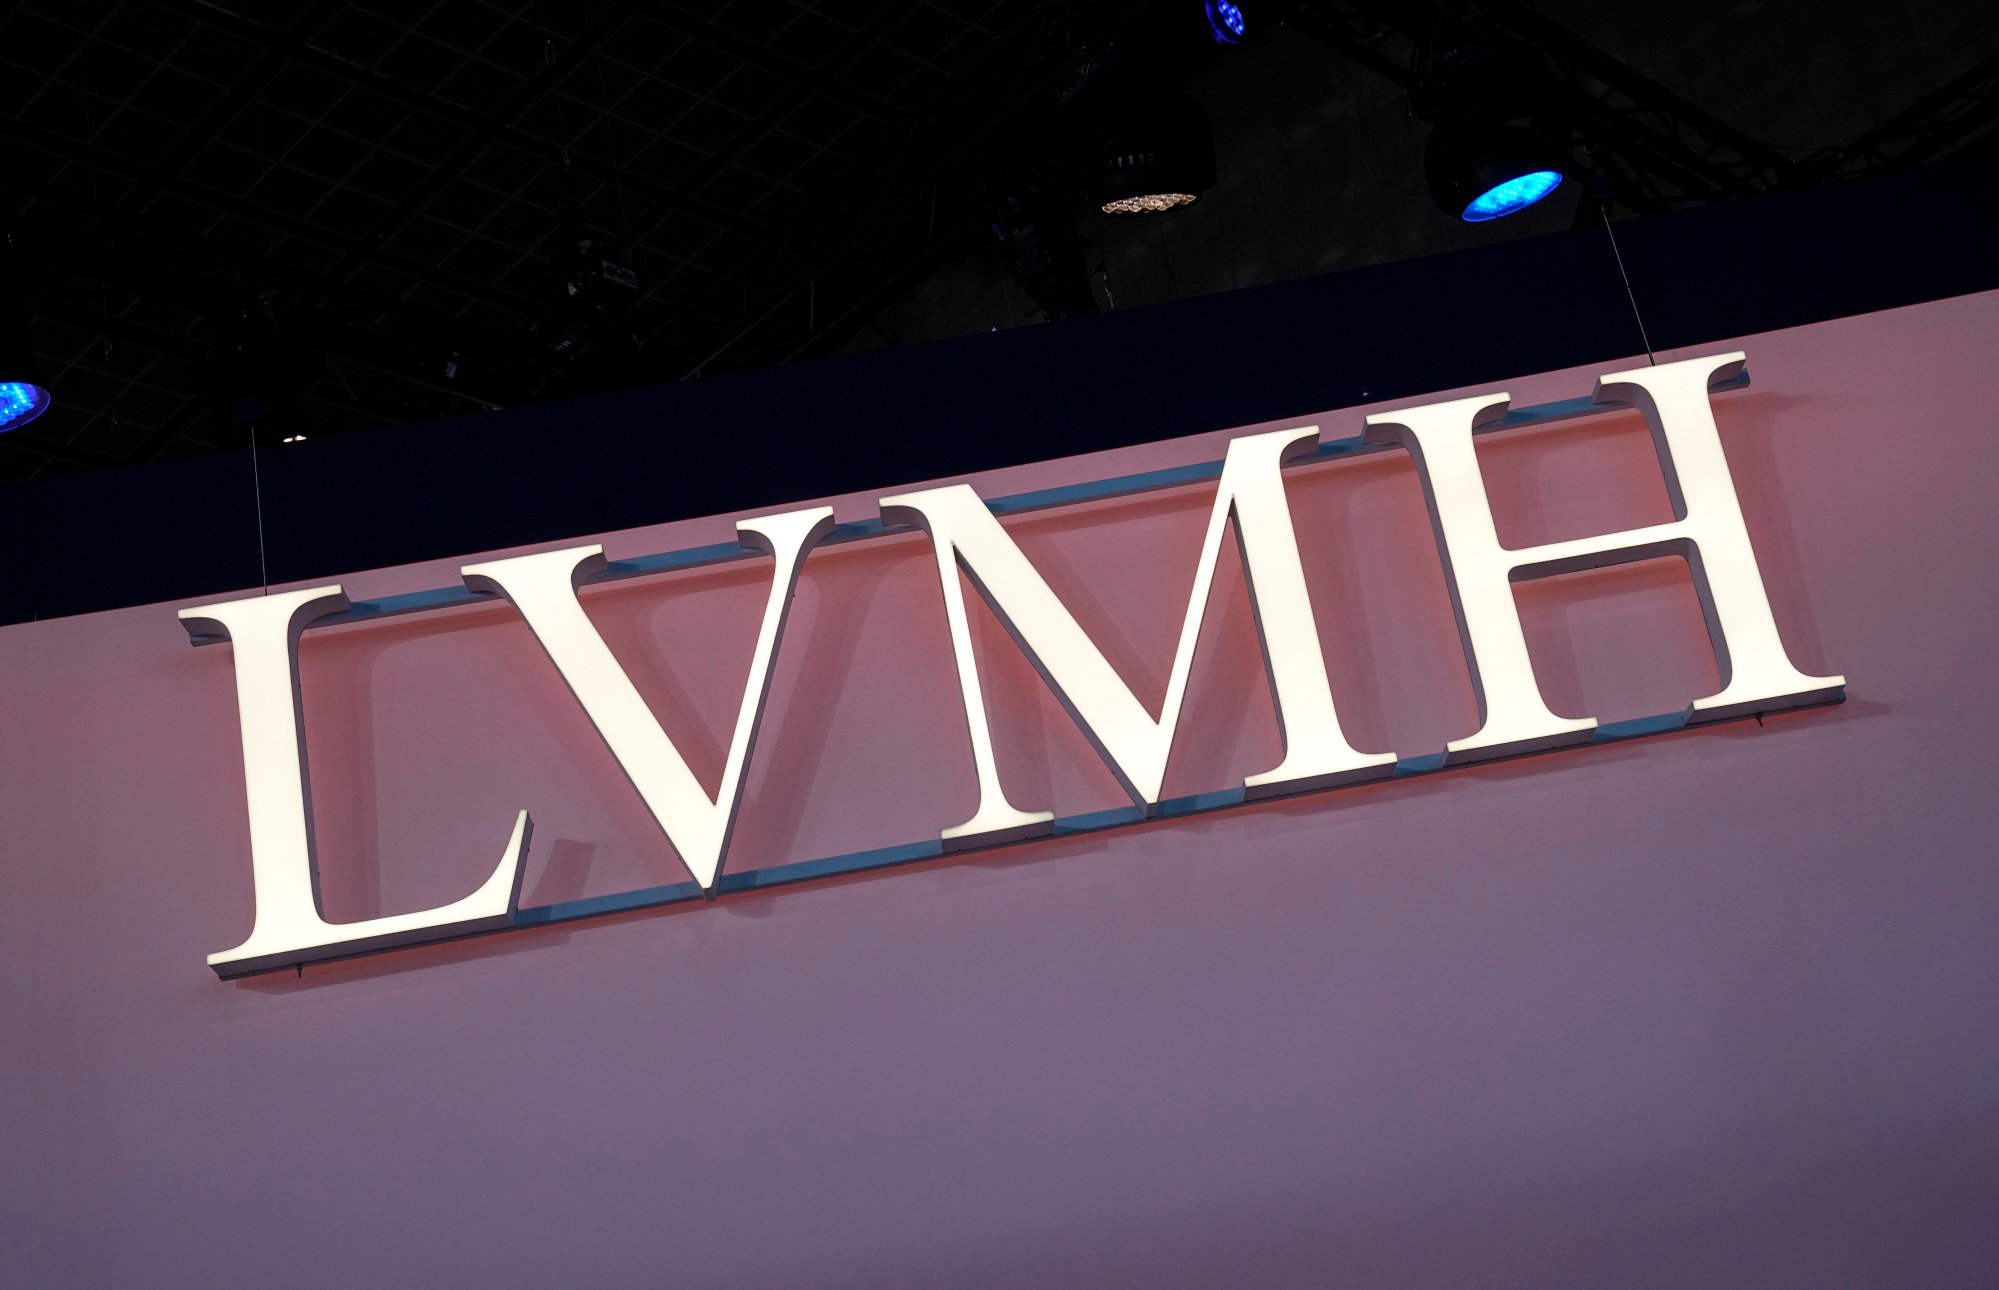 2024 Olympic Games: LVMH makes itself scarce - Luxus Plus